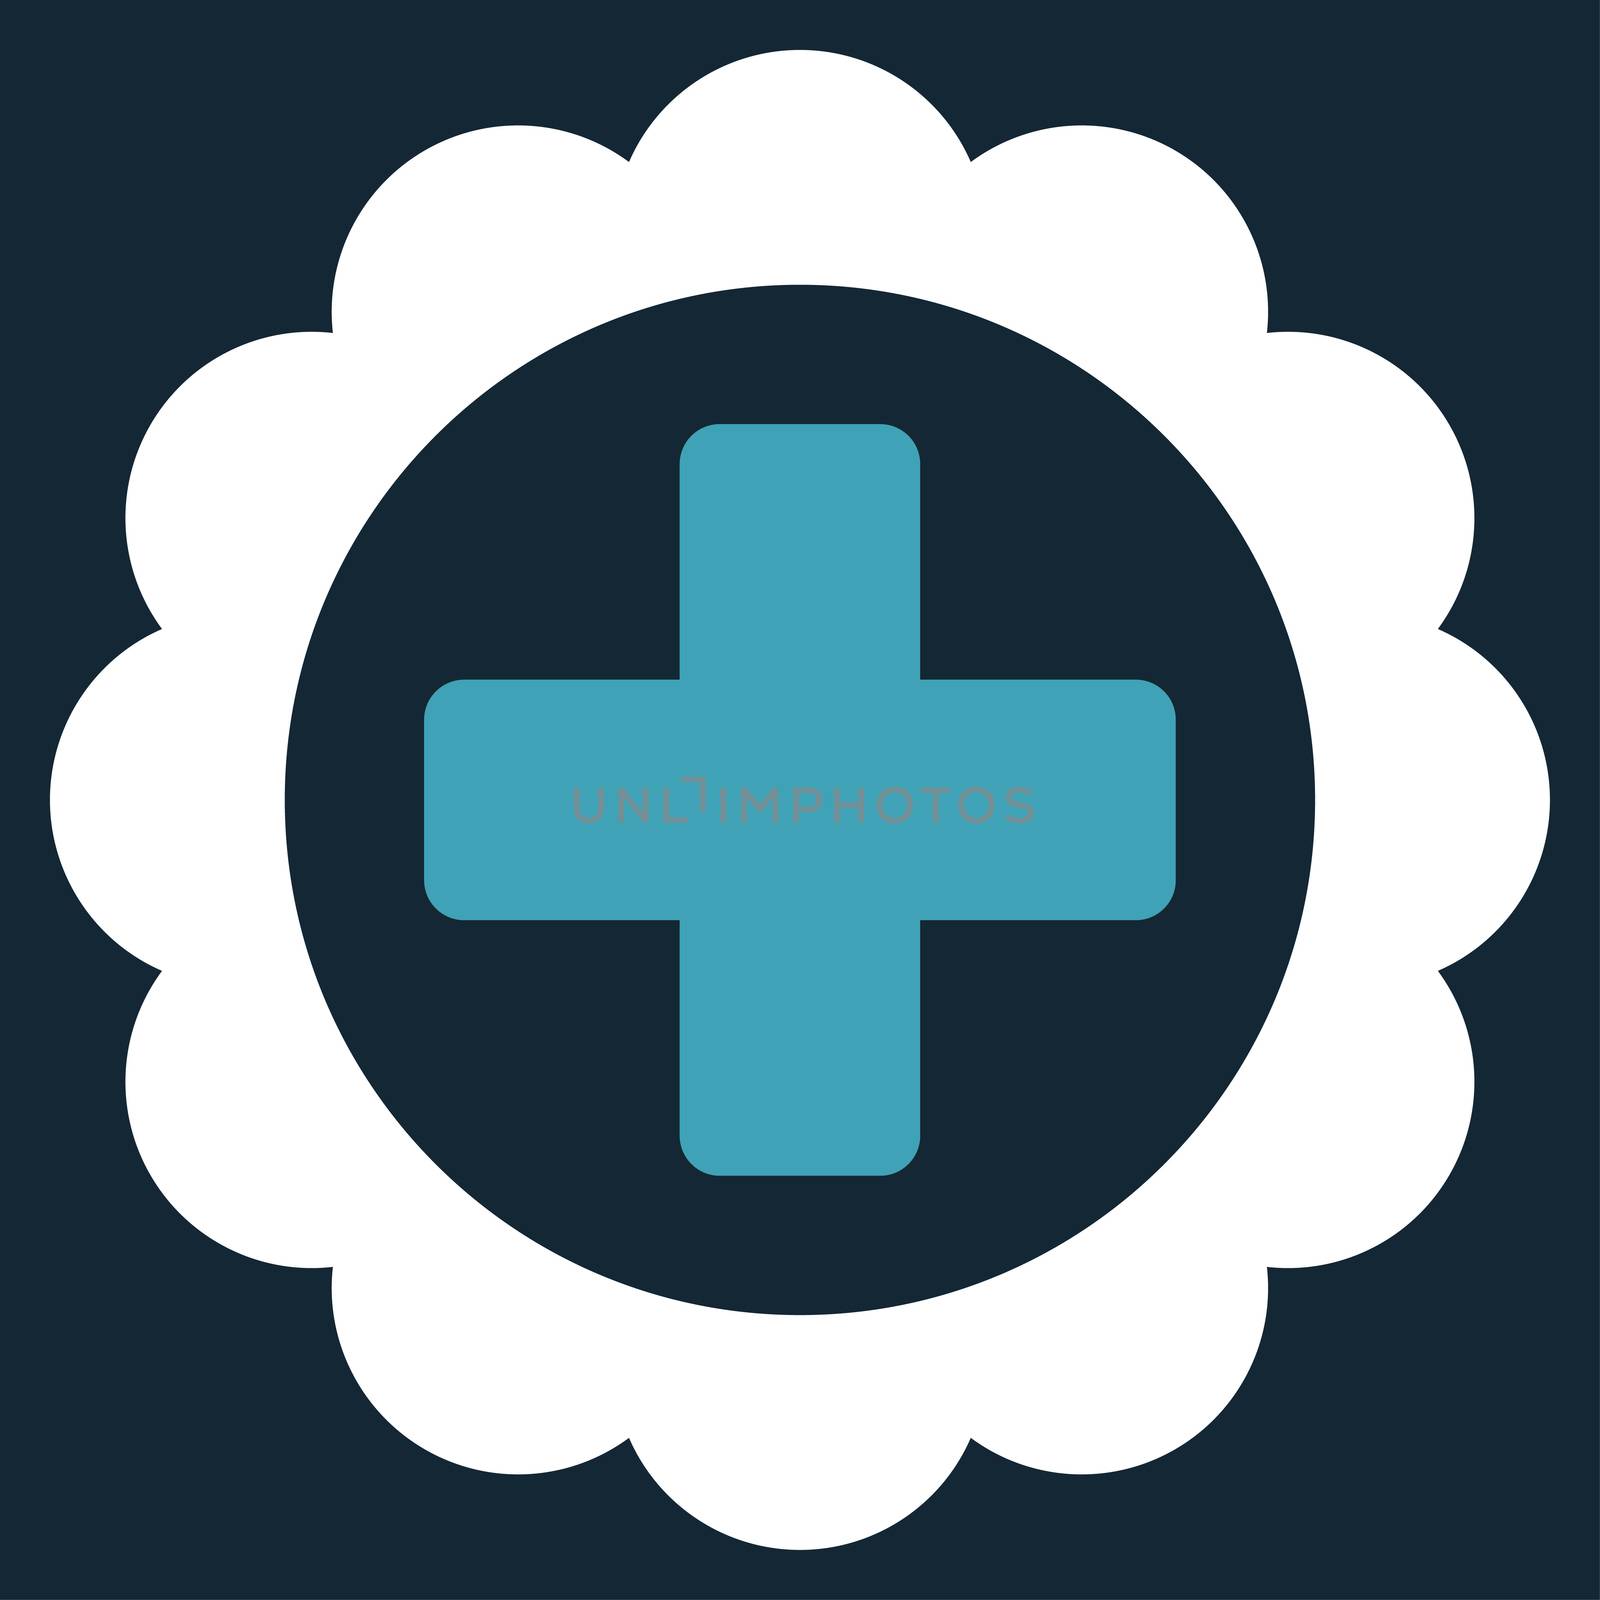 Medical Sticker raster icon. Style is bicolor flat symbol, blue and white colors, rounded angles, dark blue background.